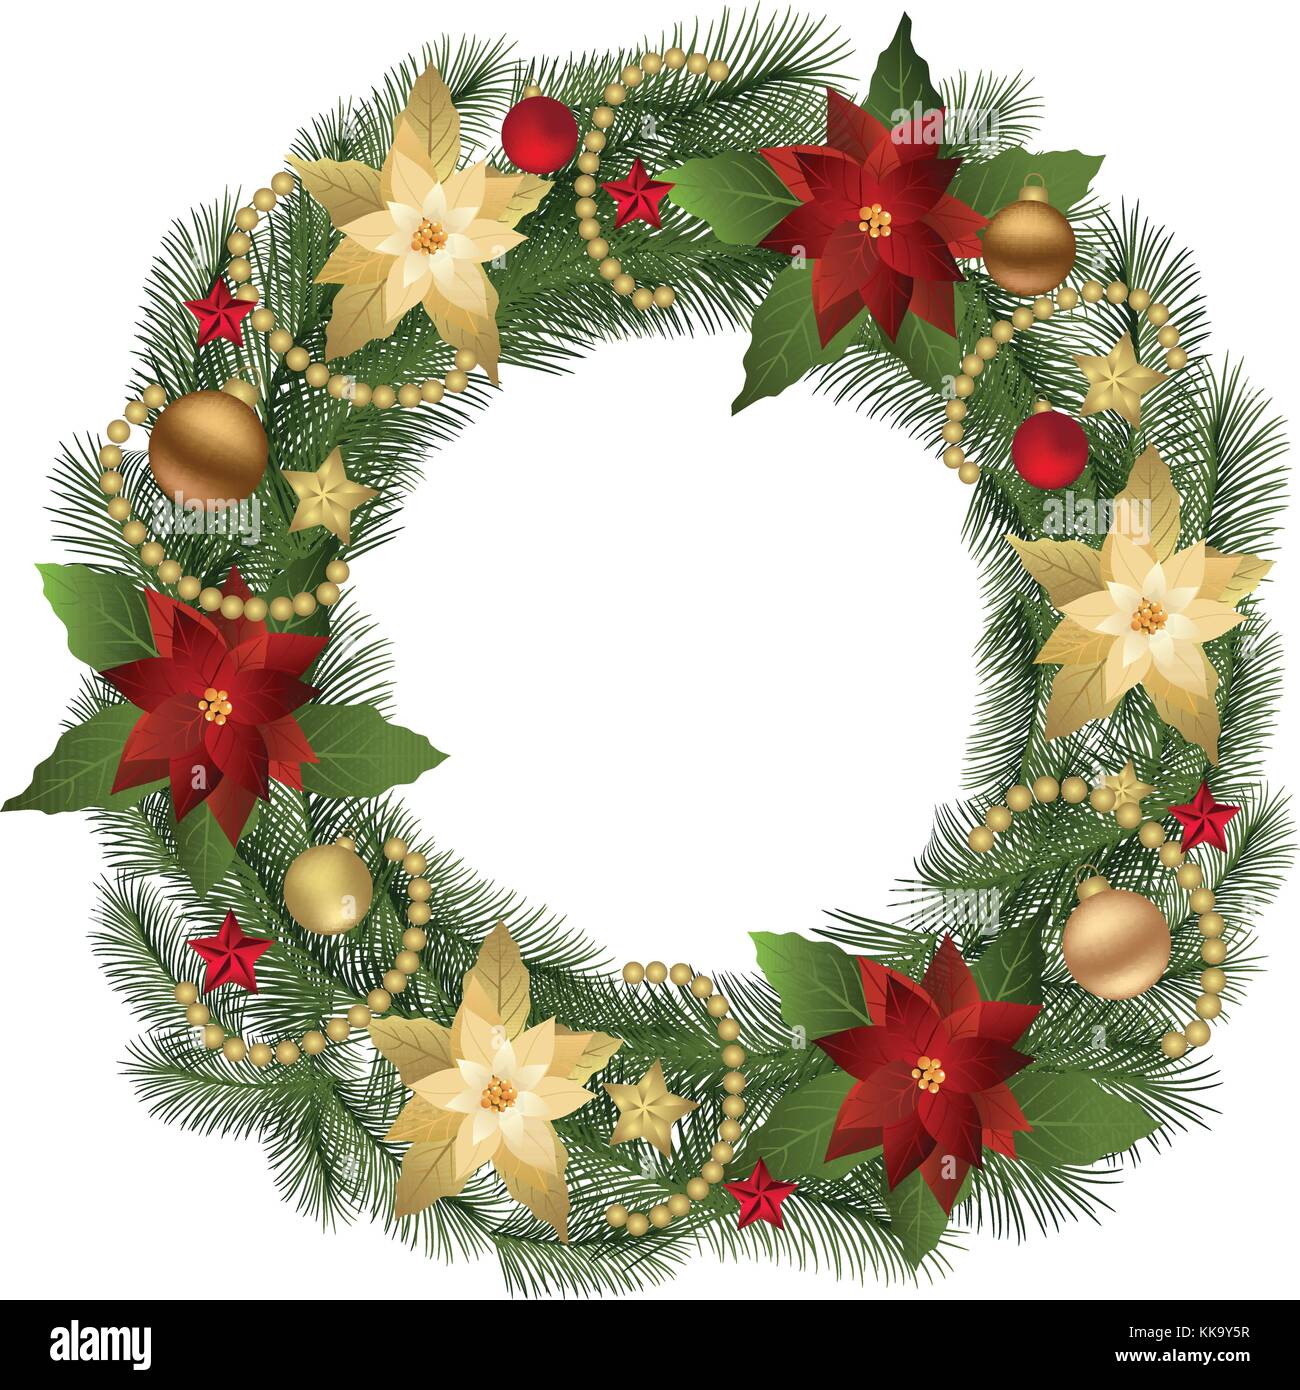 Christmas Wreath with fir branches and decorative elements. Stock Vector